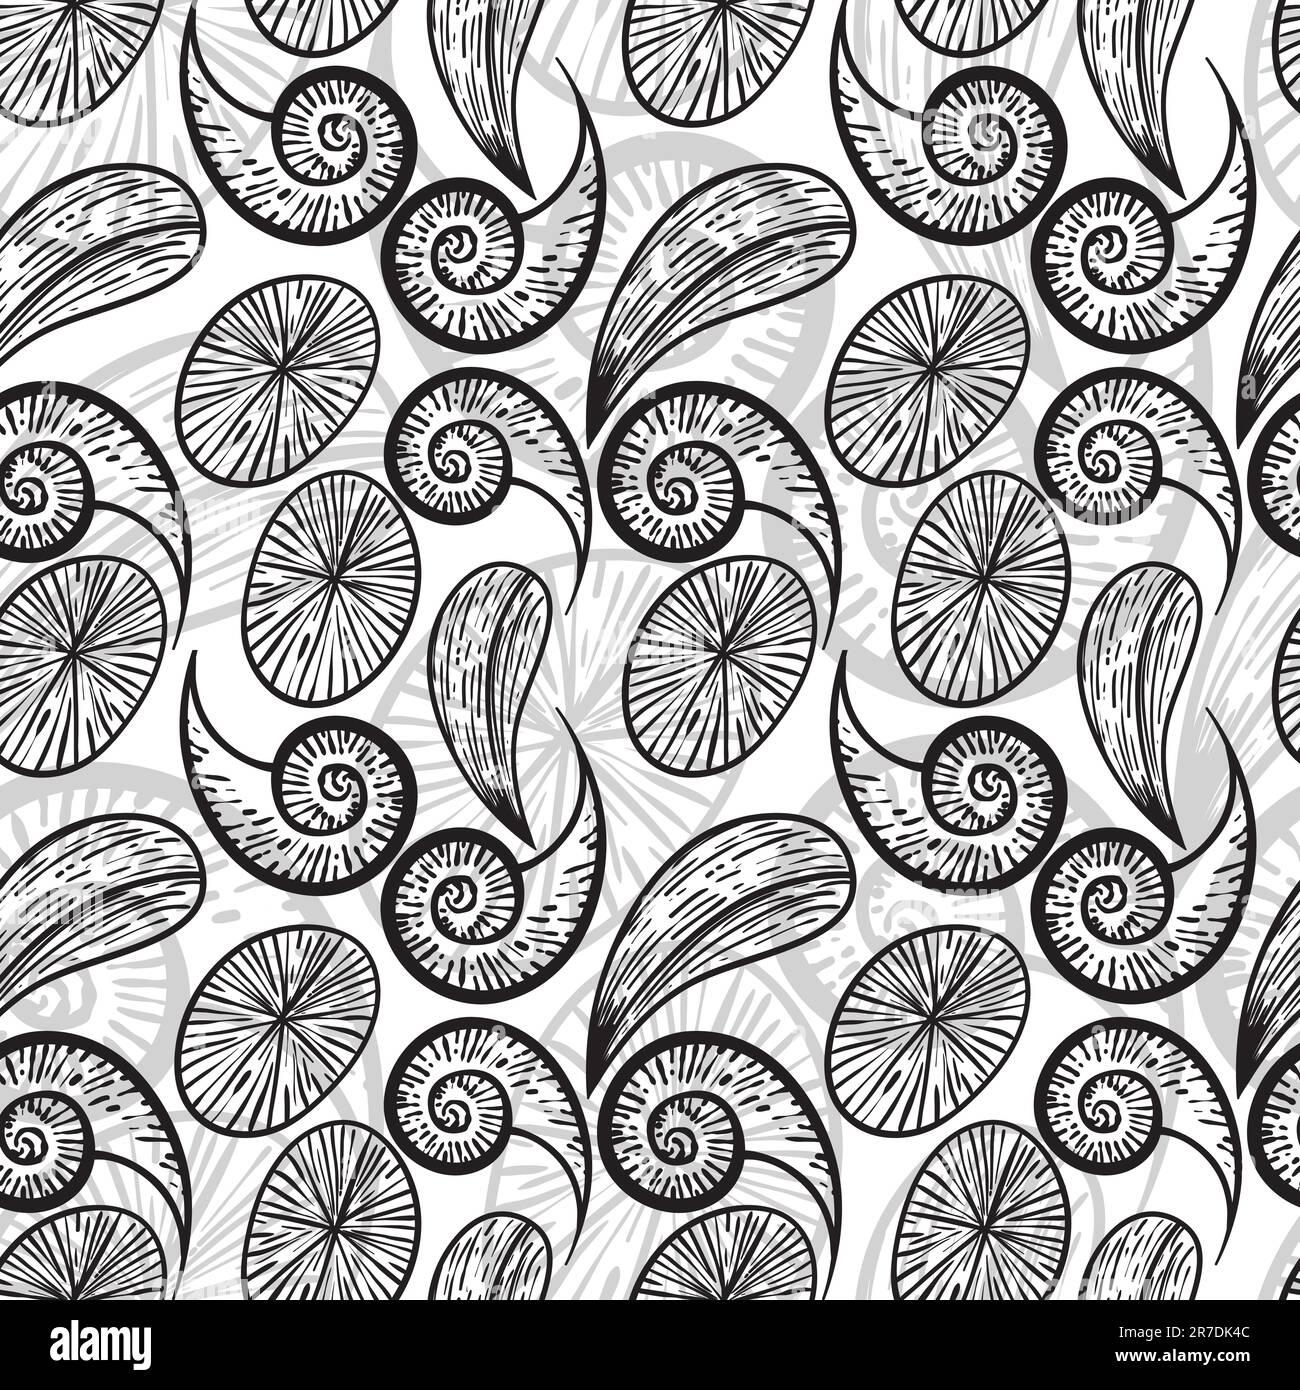 vector seamless abstract hand drawn monochrome pattern Stock Vector